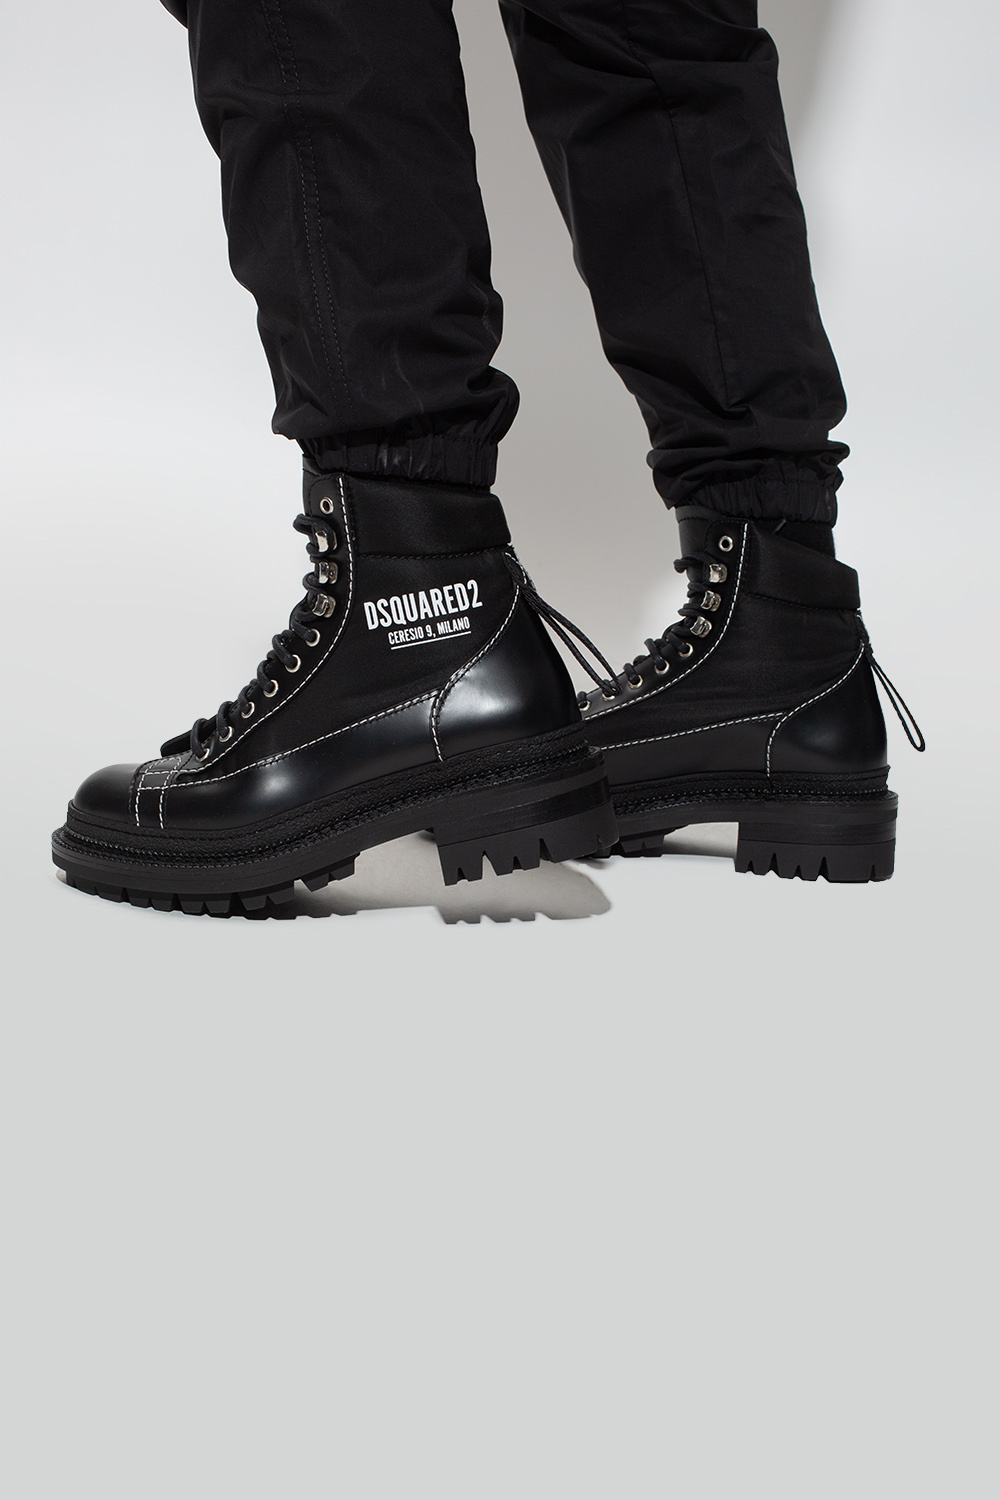 Dsquared2 Hiking boots with logo